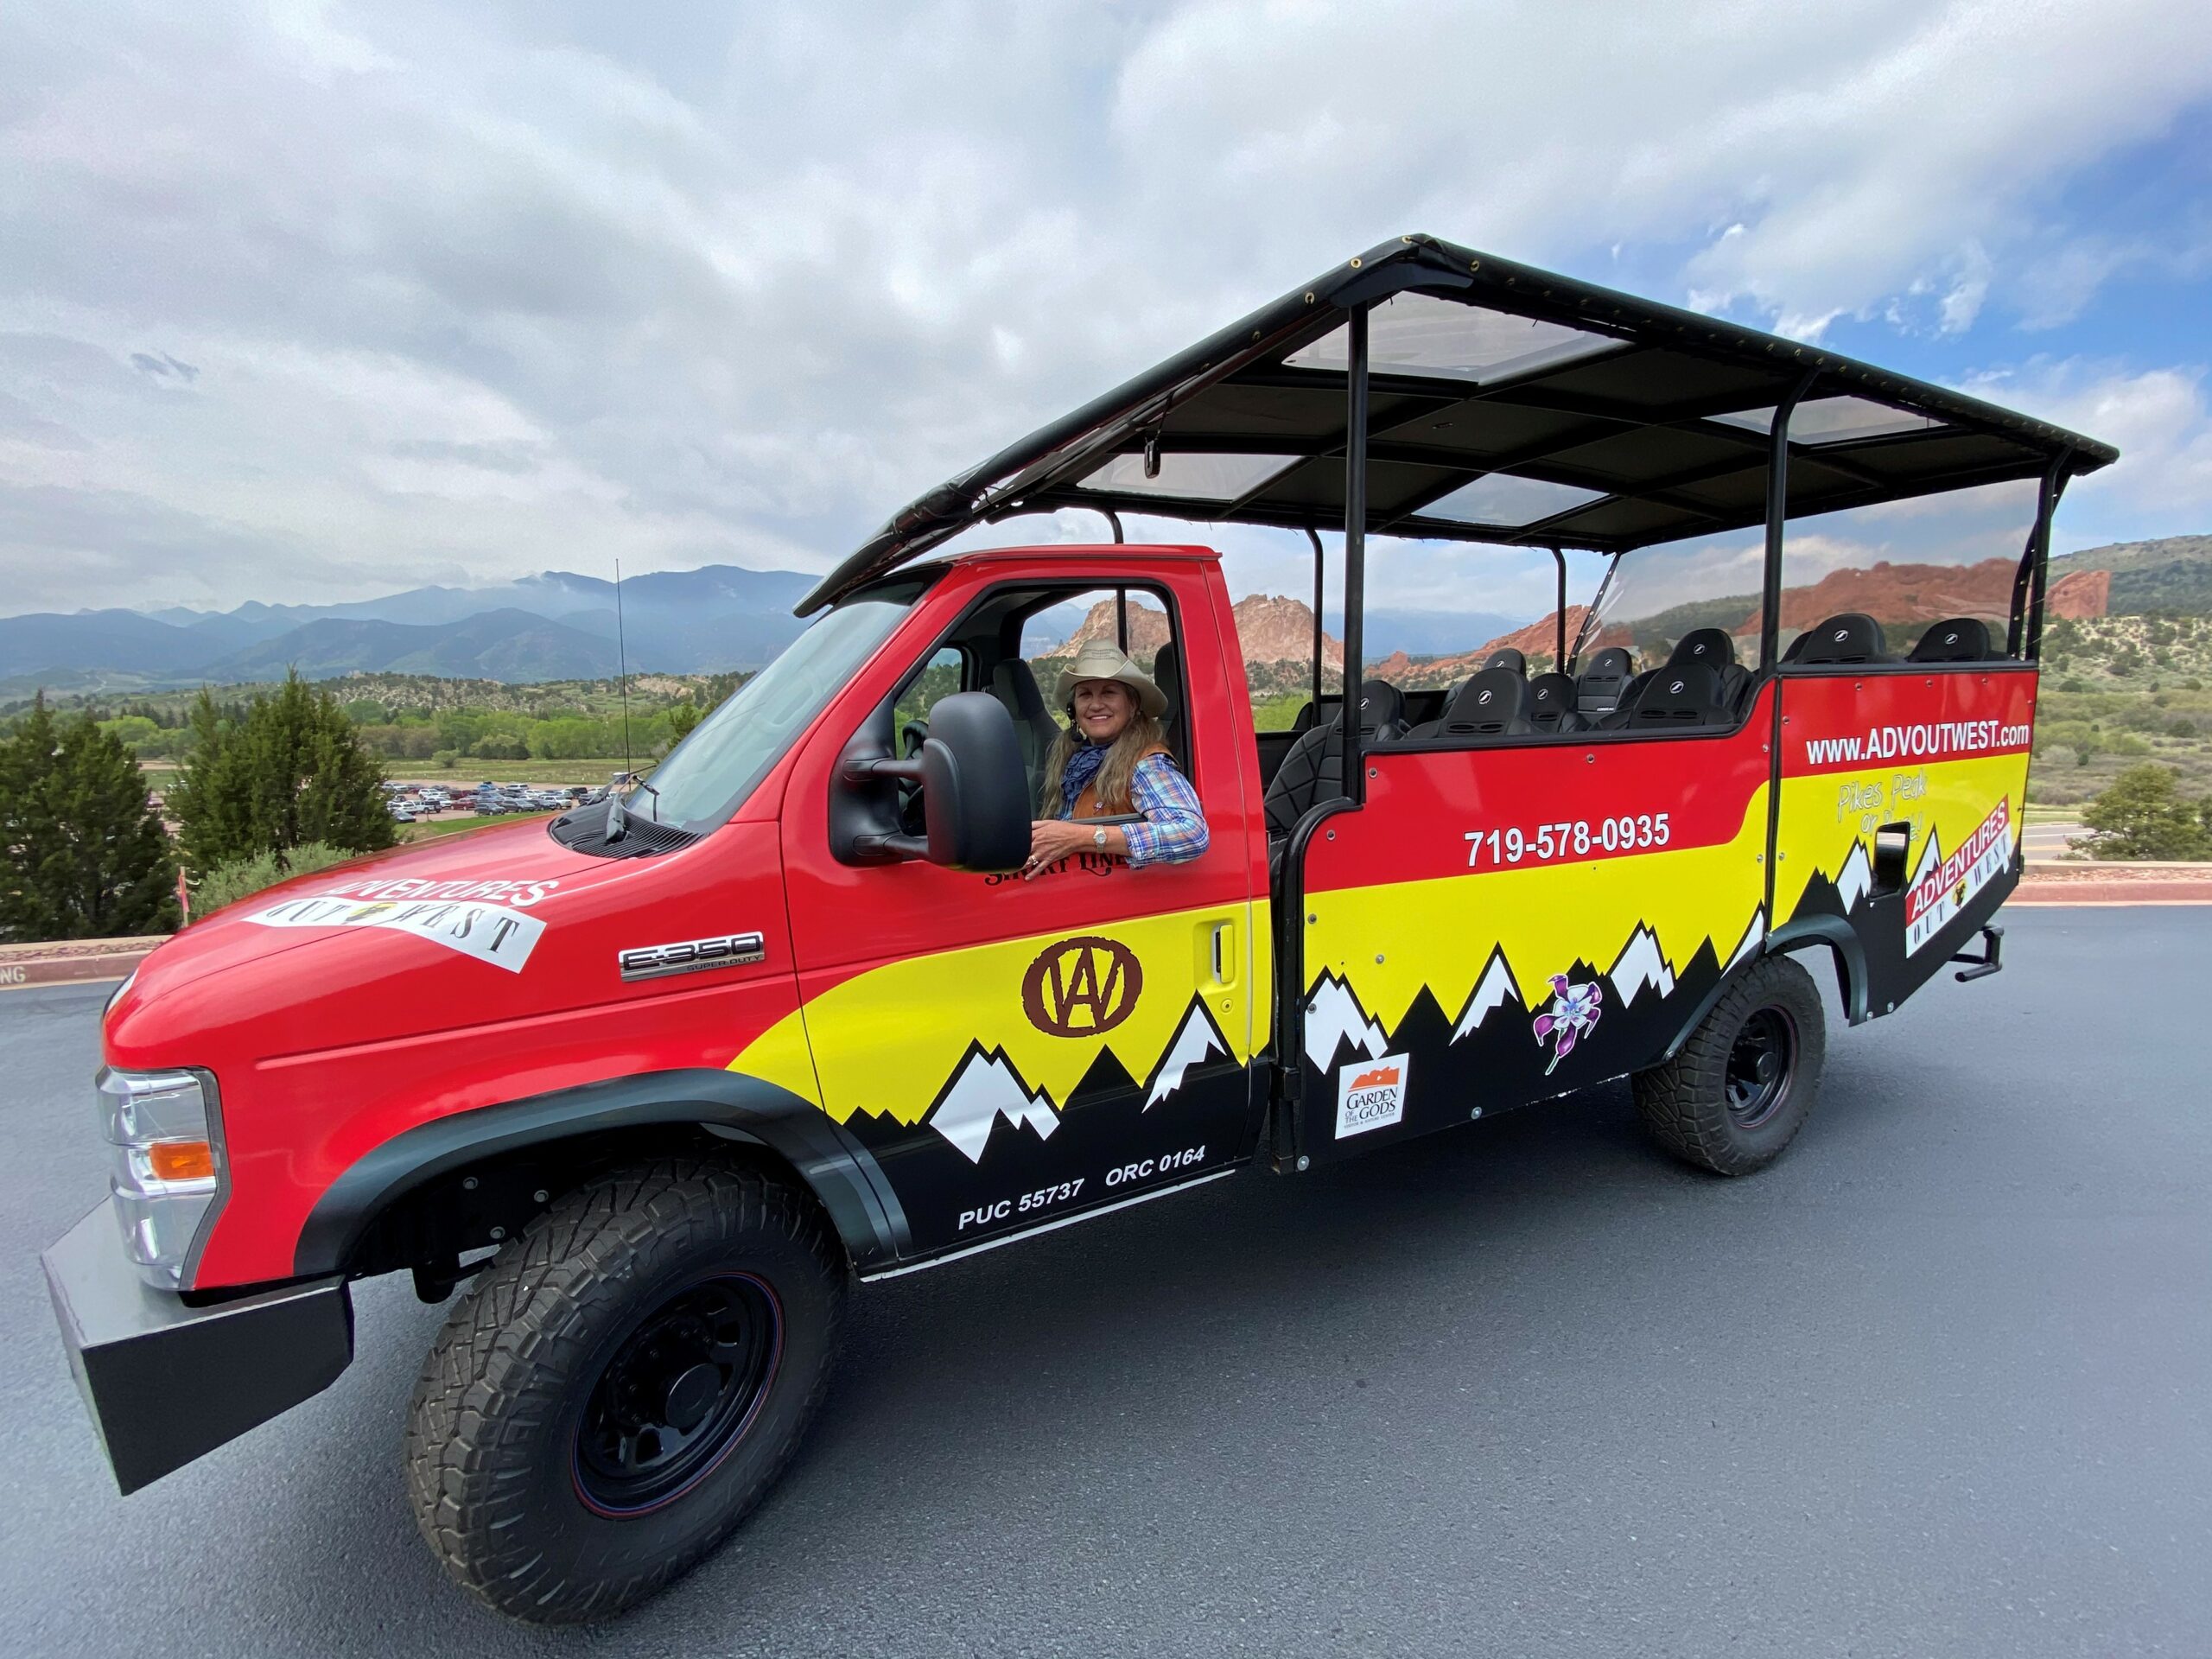 tour guide vehicle